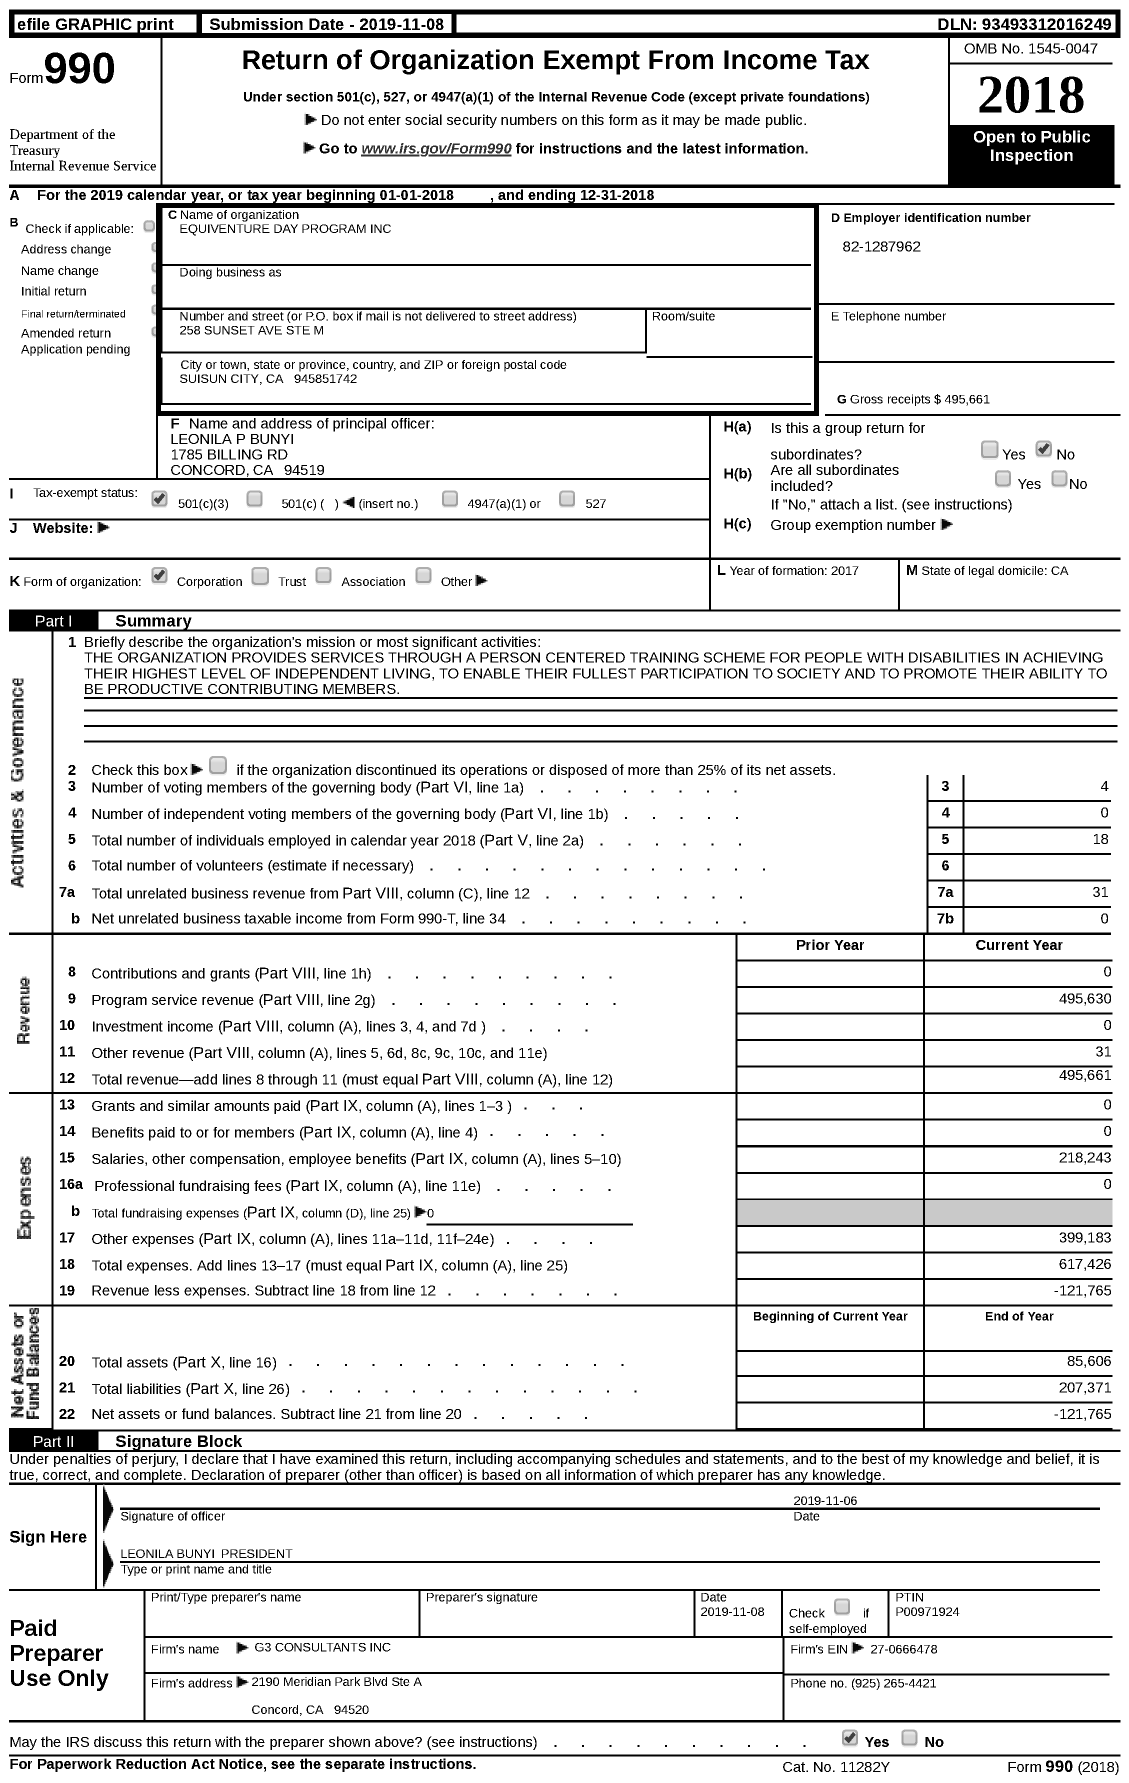 Image of first page of 2018 Form 990 for Equiventure Day Program